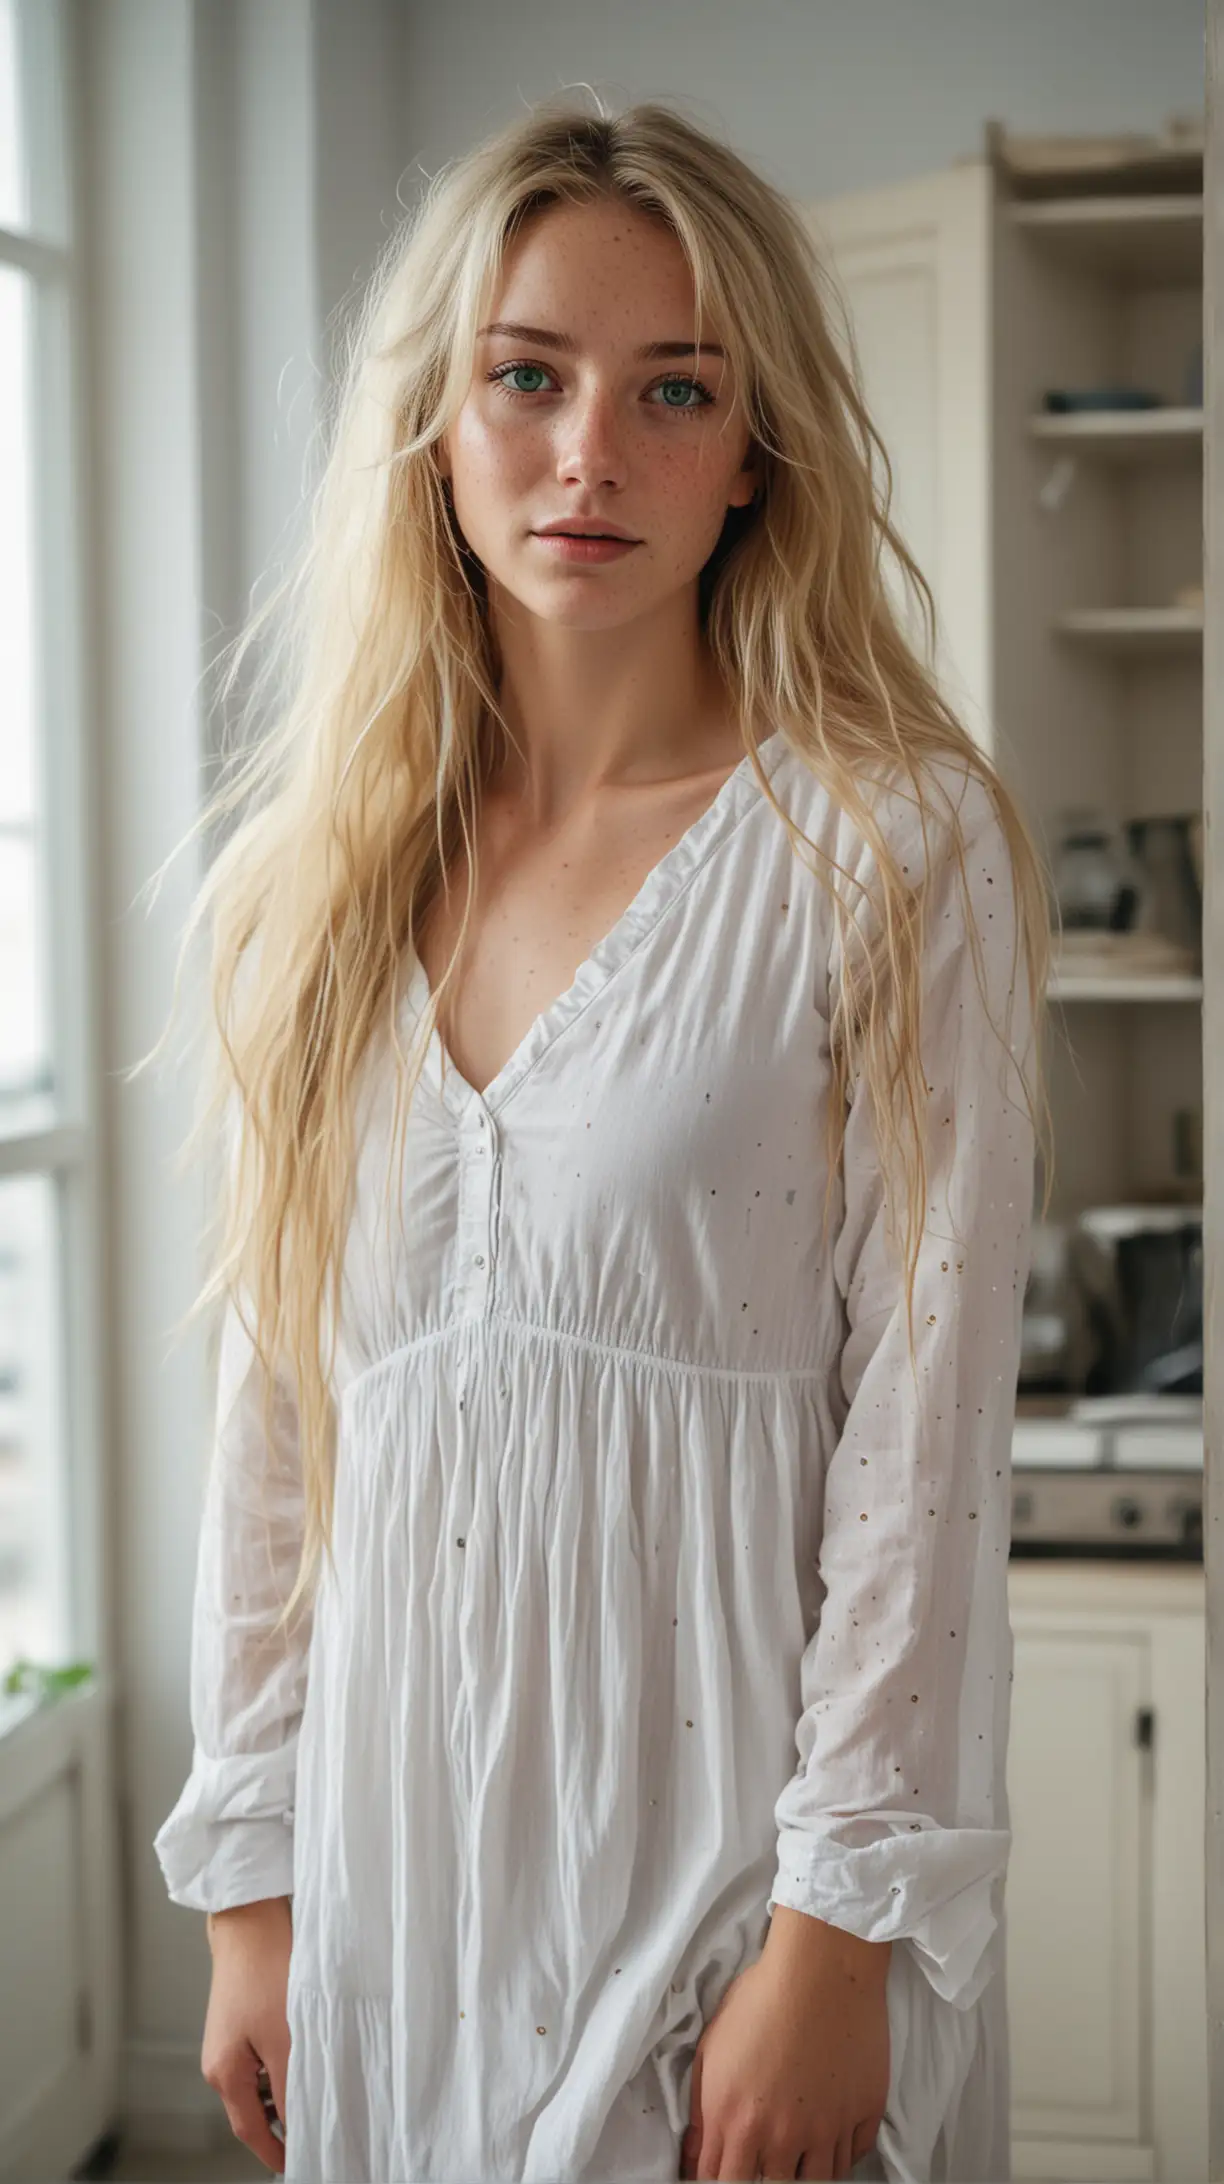 Young Woman with Long Blonde Hair in a White Dress Standing in a Sunlit Apartment